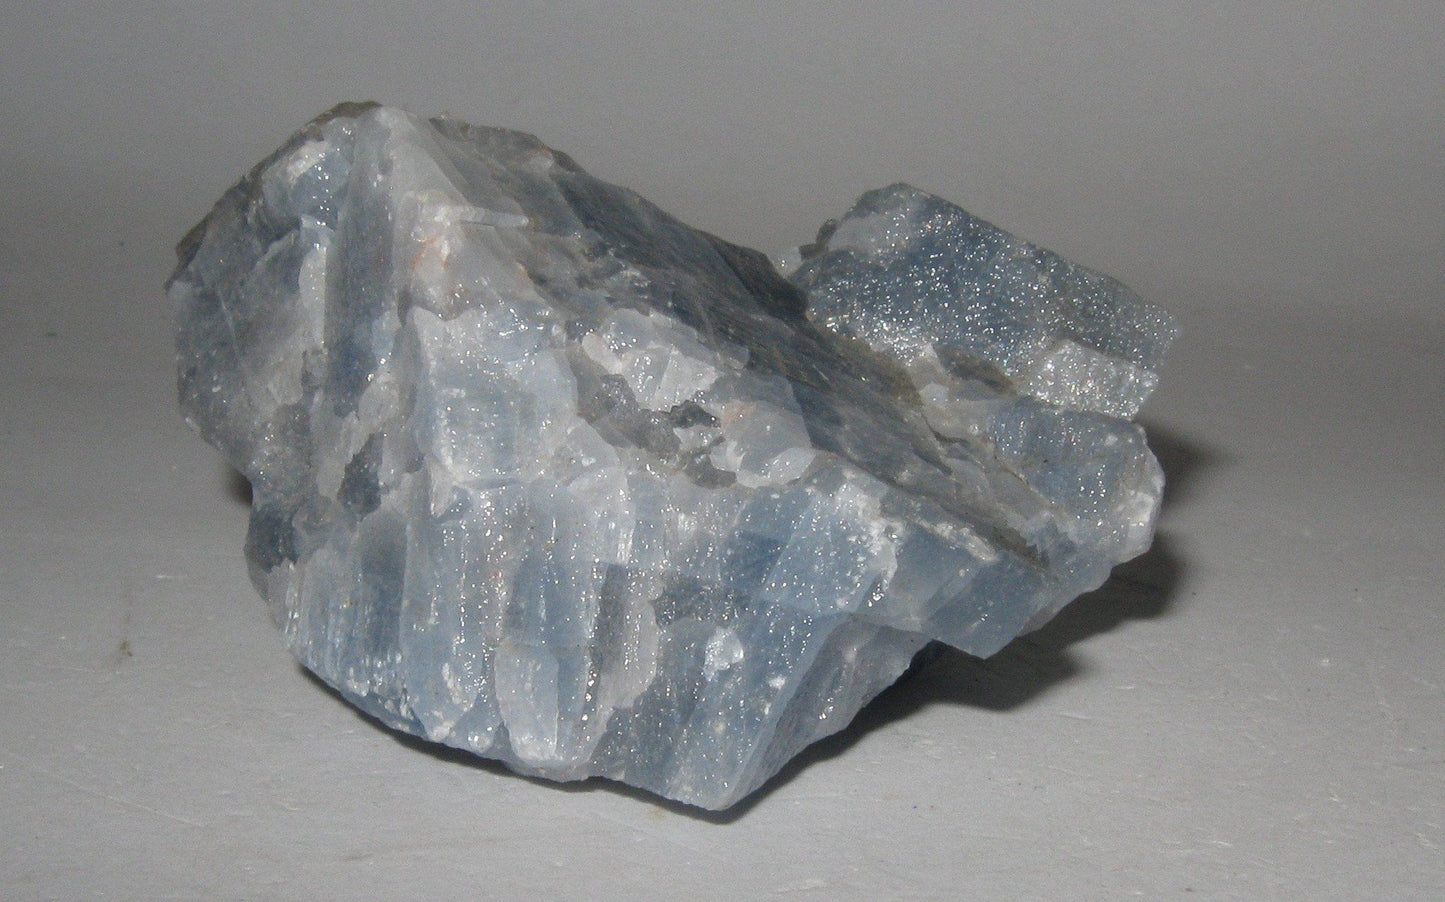 Blue Calcite - Chihuahua, Mexico | Of Coins & Crystals